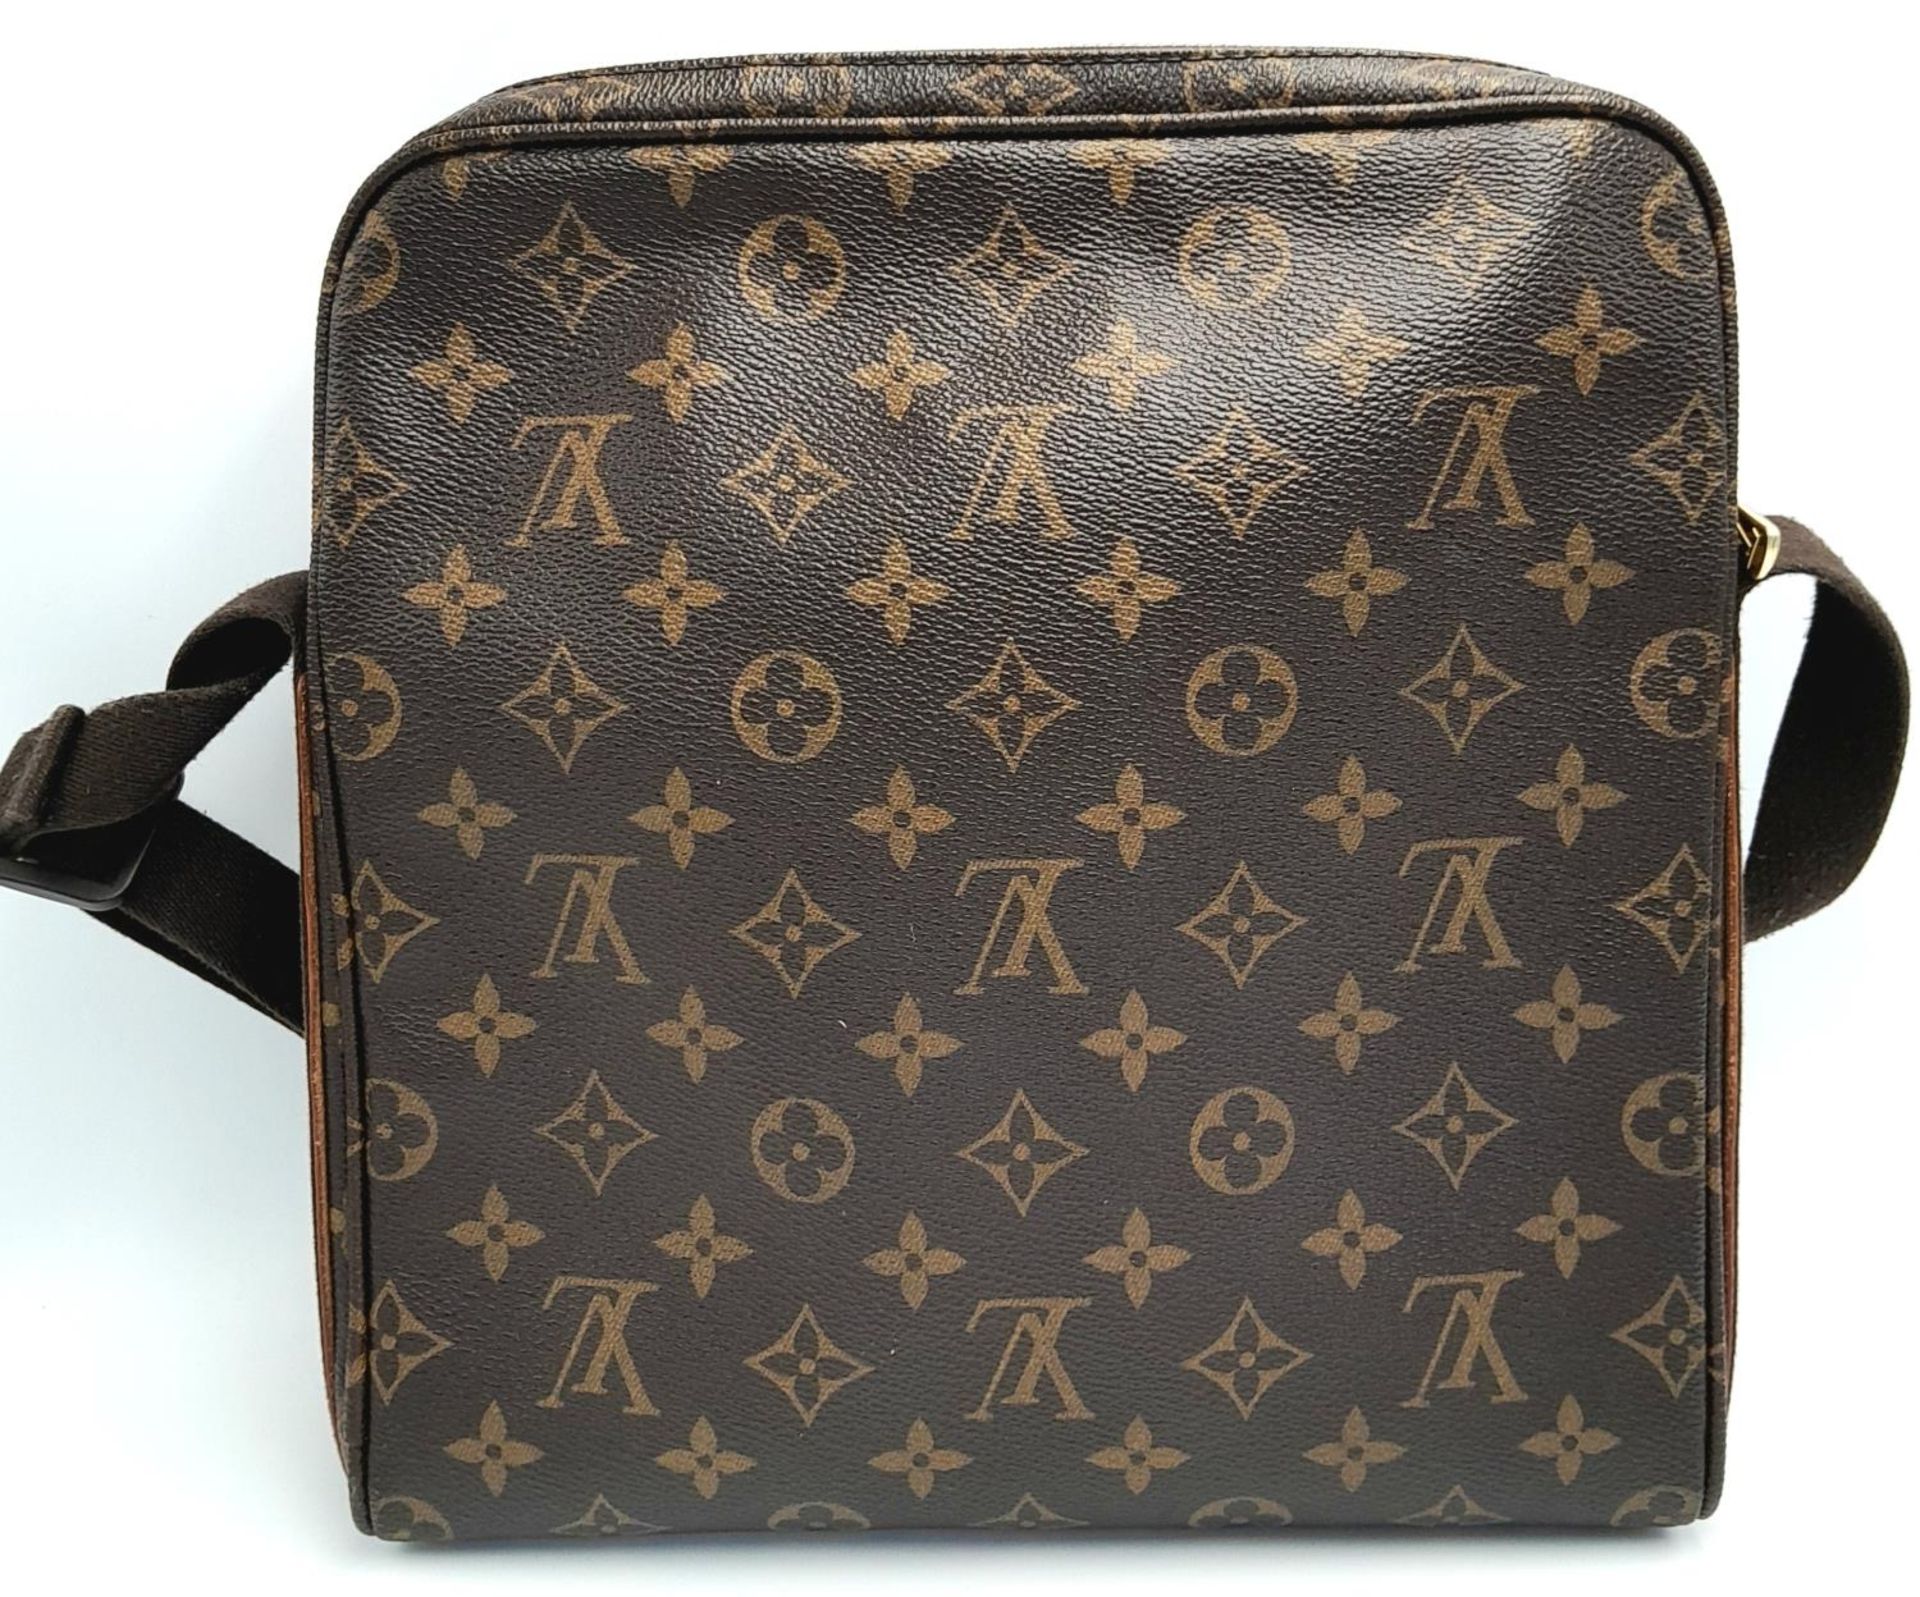 A Louis Vuitton Trotteur Beaubourg Satchel Bag. Monogramed canvas exterior with gold-toned hardware, - Image 2 of 9